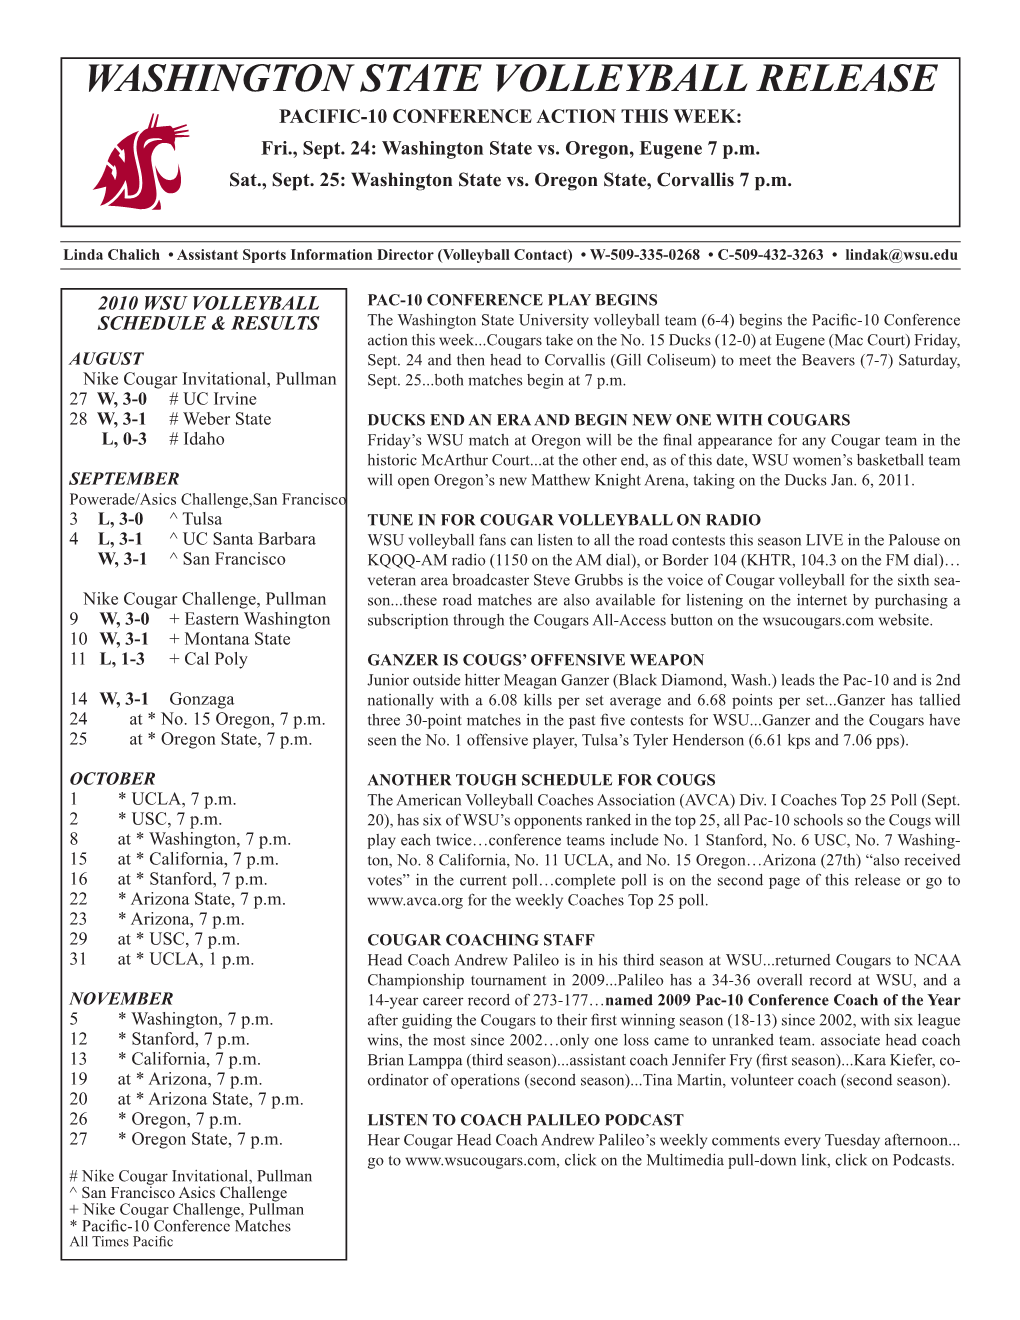 WASHINGTON STATE VOLLEYBALL RELEASE PACIFIC-10 CONFERENCE ACTION THIS WEEK: Fri., Sept